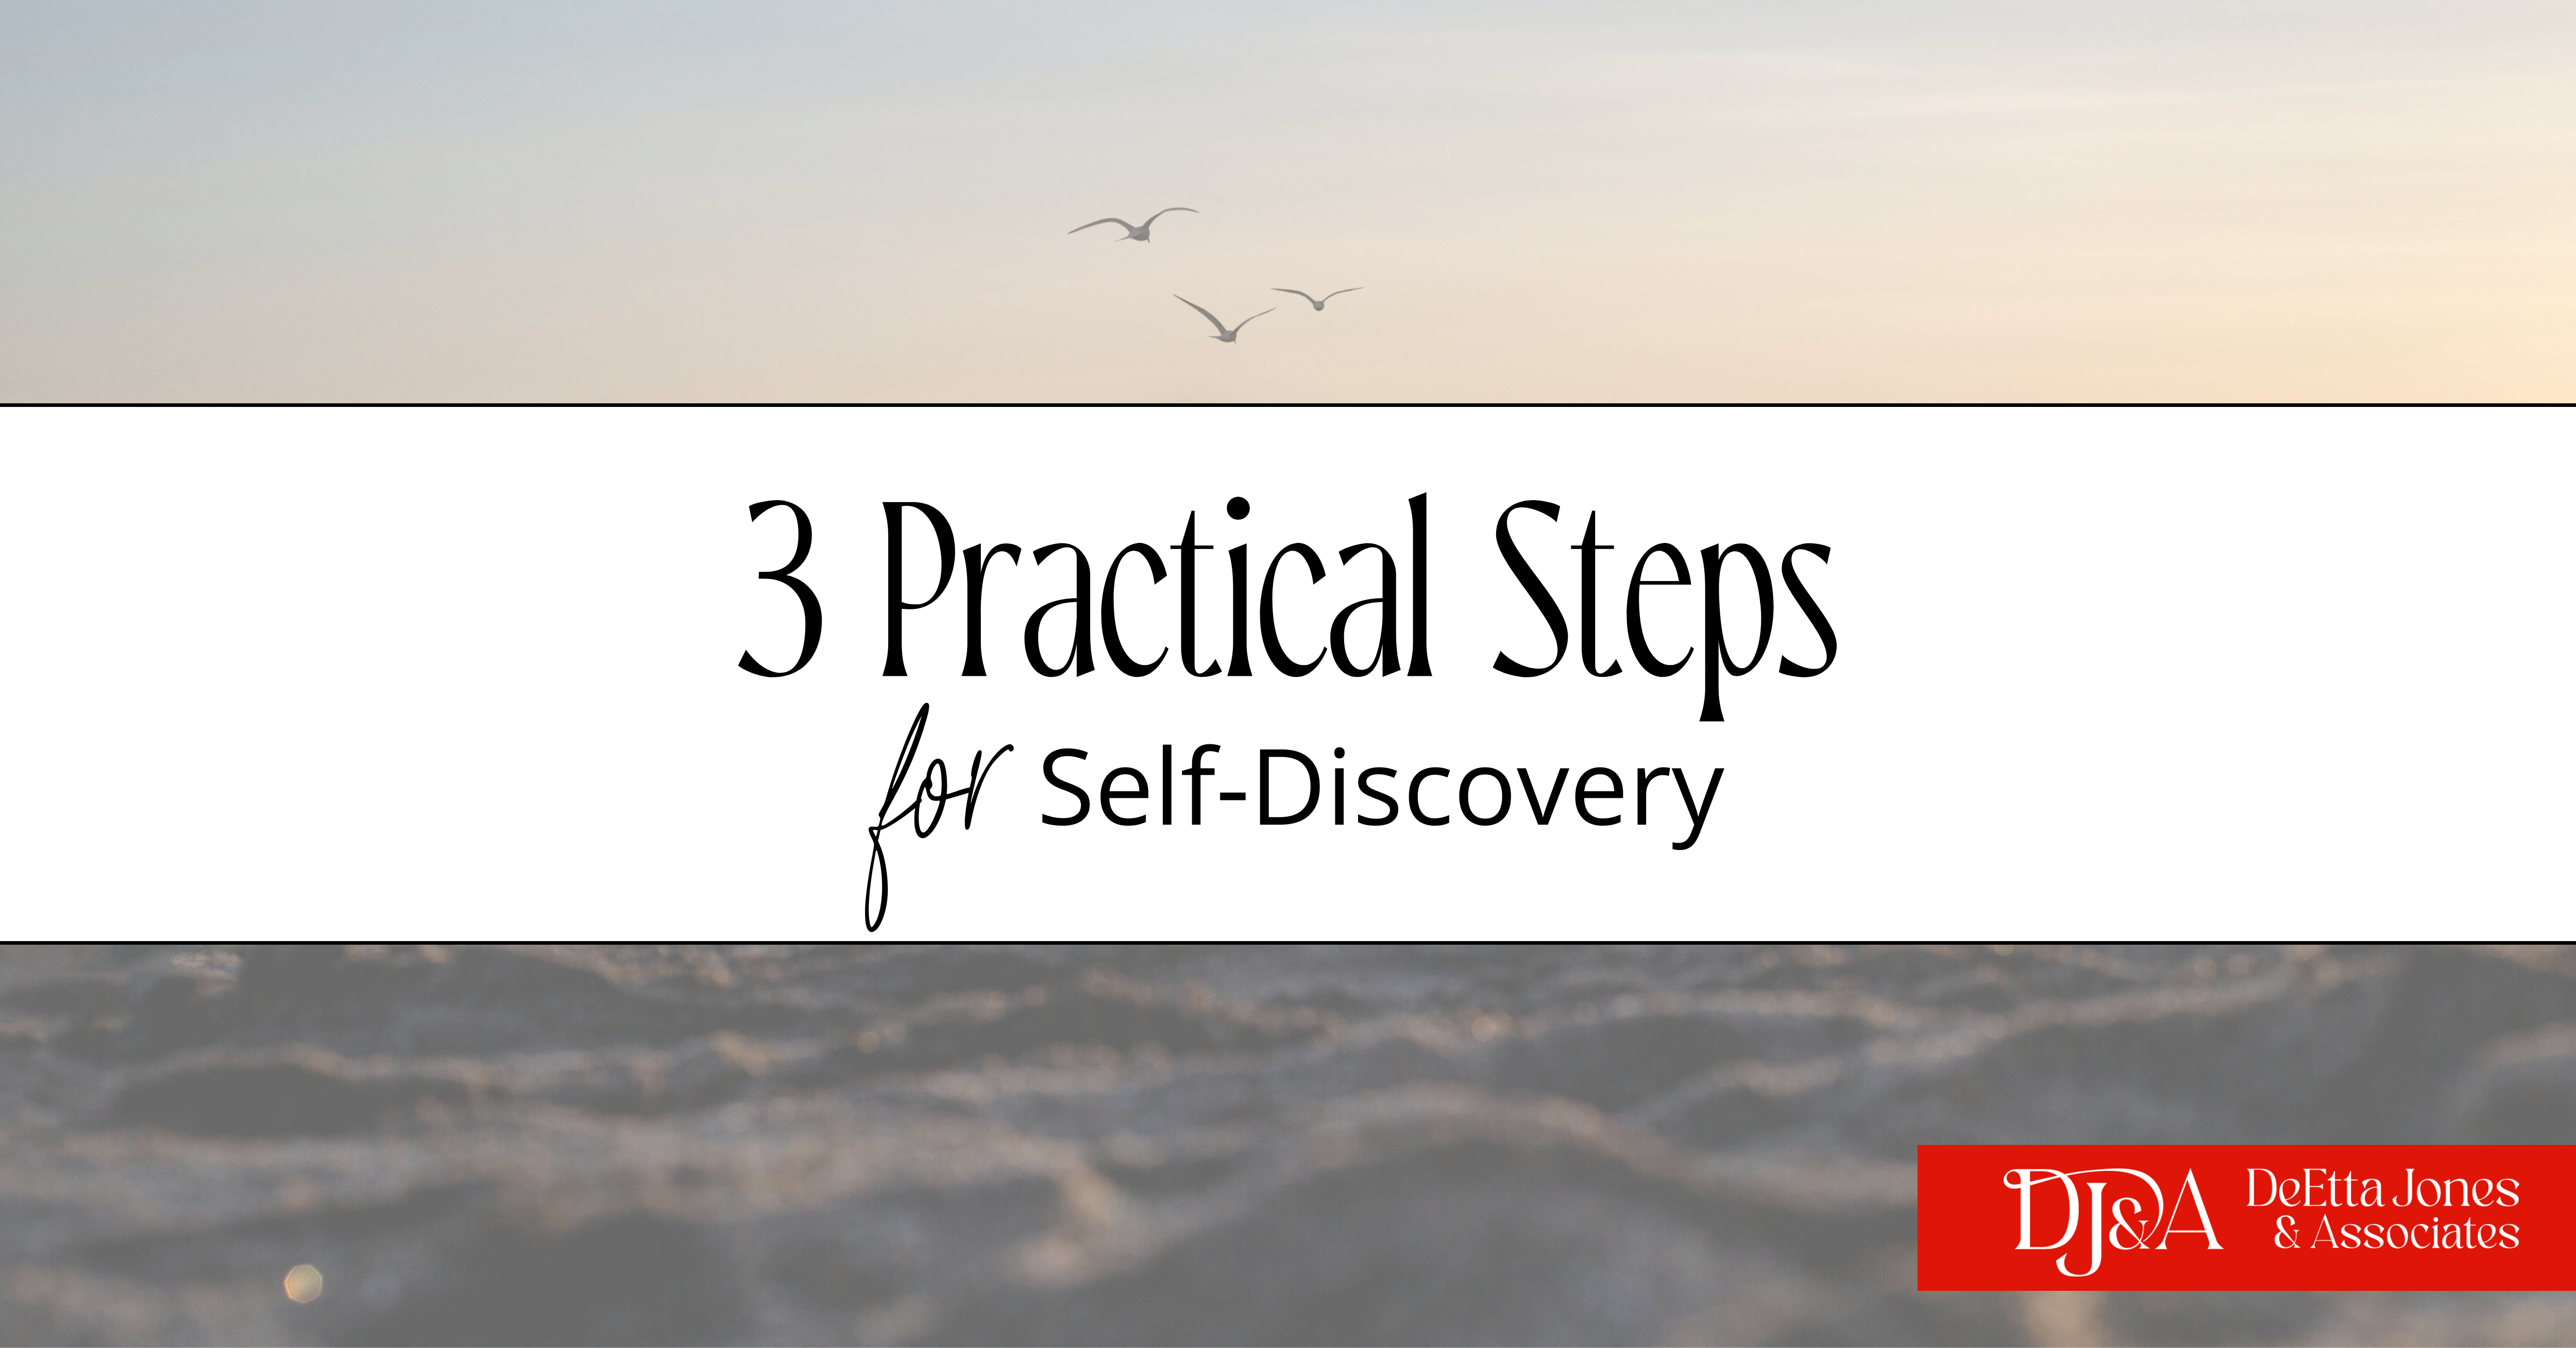 3 Practical Steps for Self-Discovery